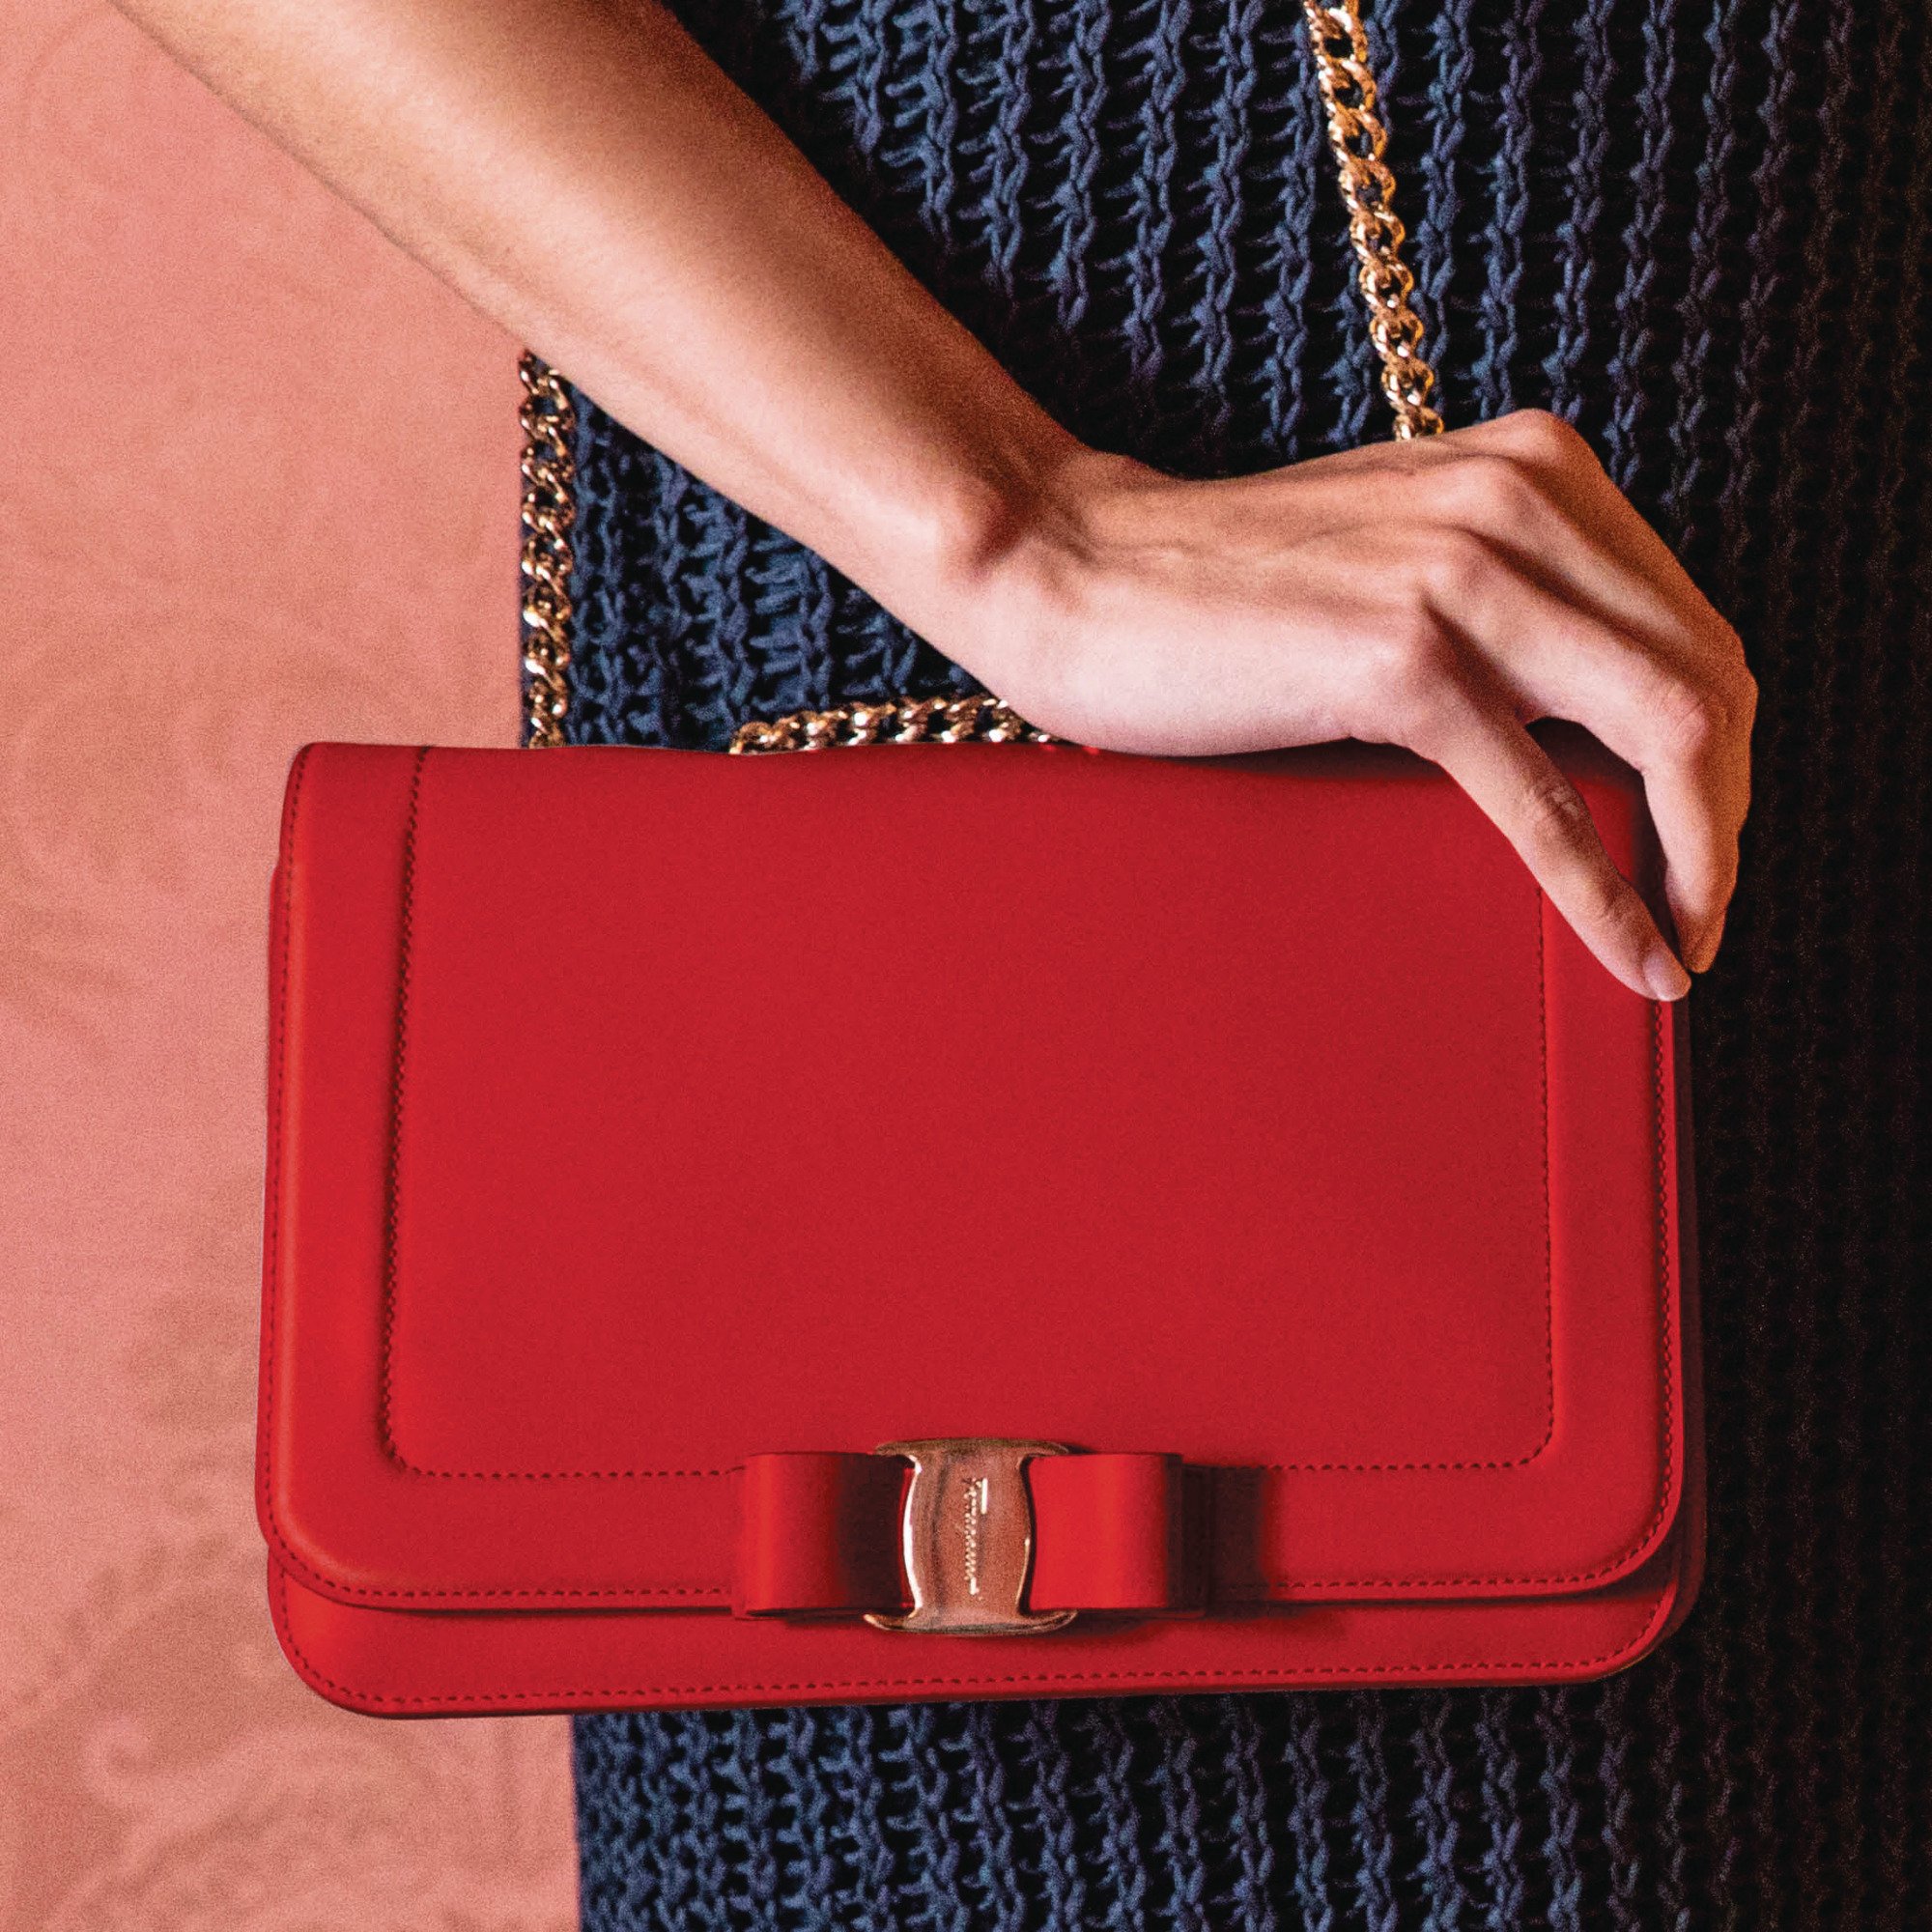 FERRAGAMO on X: A fiery red Vara Bow bag brings life to the daily